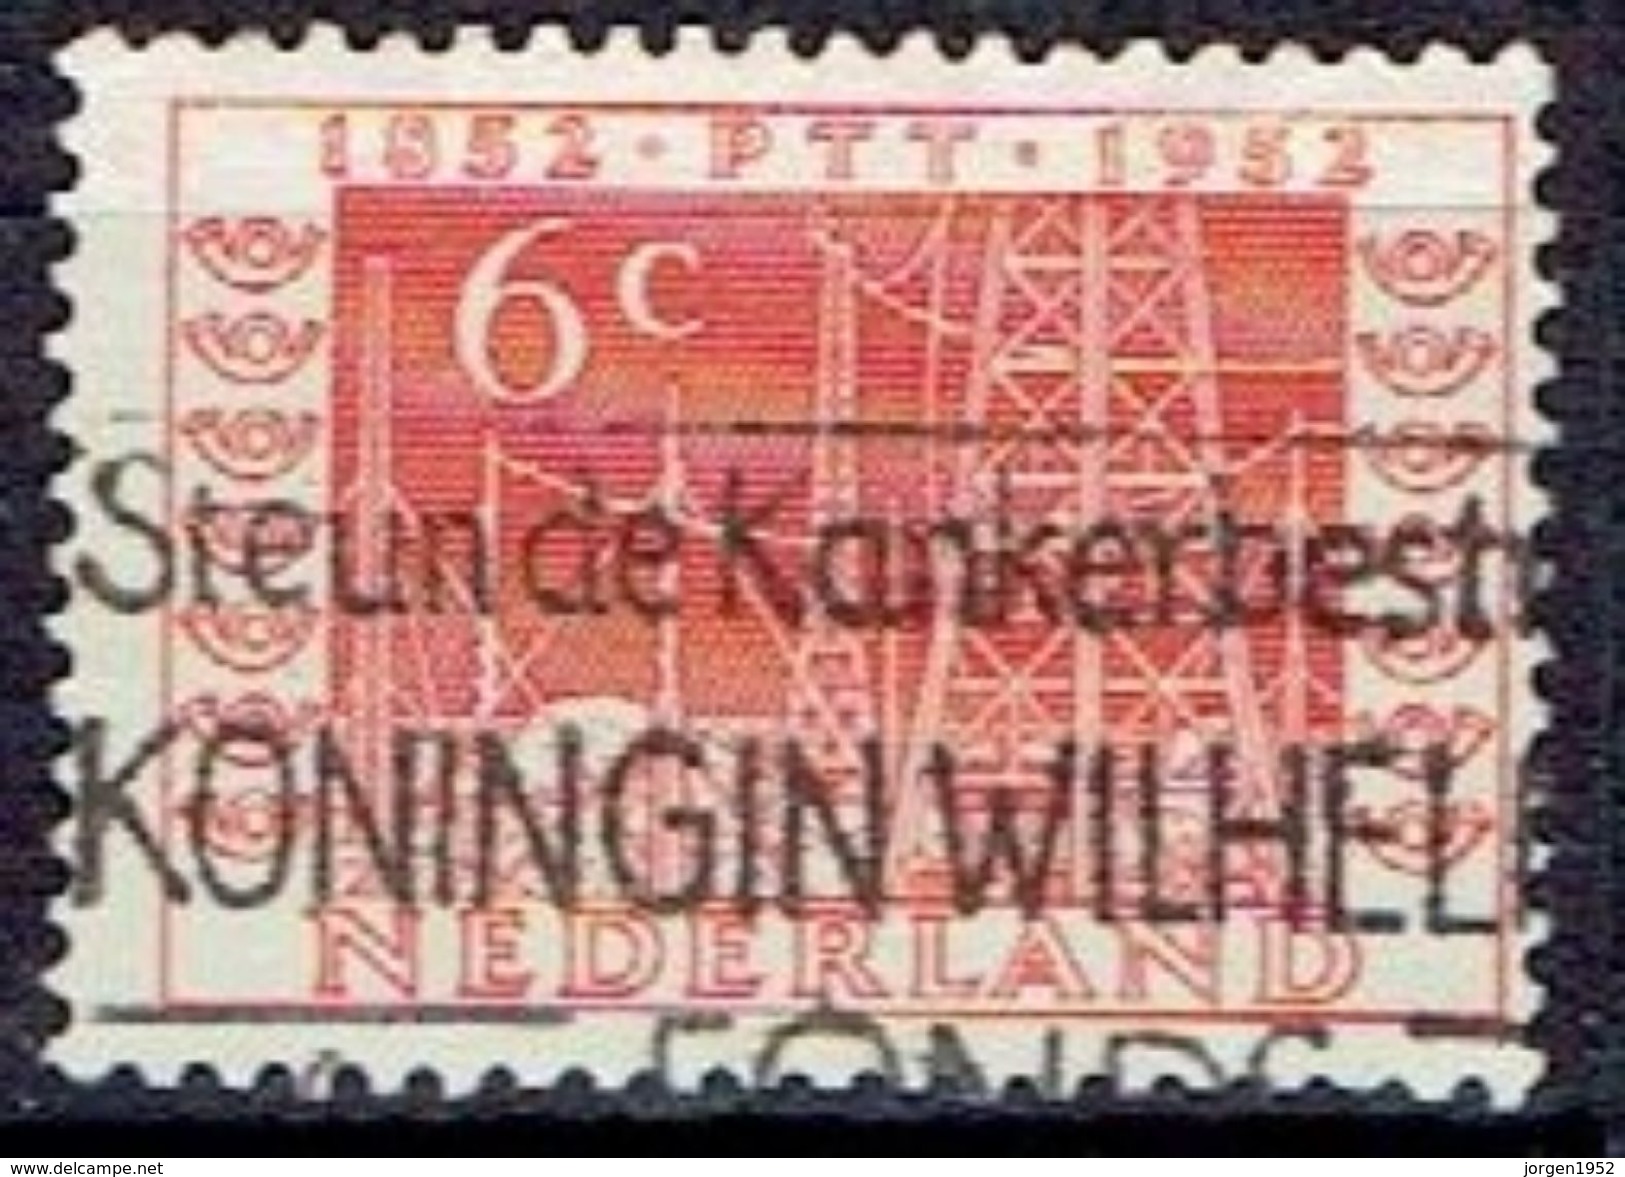 NETHERLANDS # FROM 1952  STAMPWORLD 594 - Used Stamps